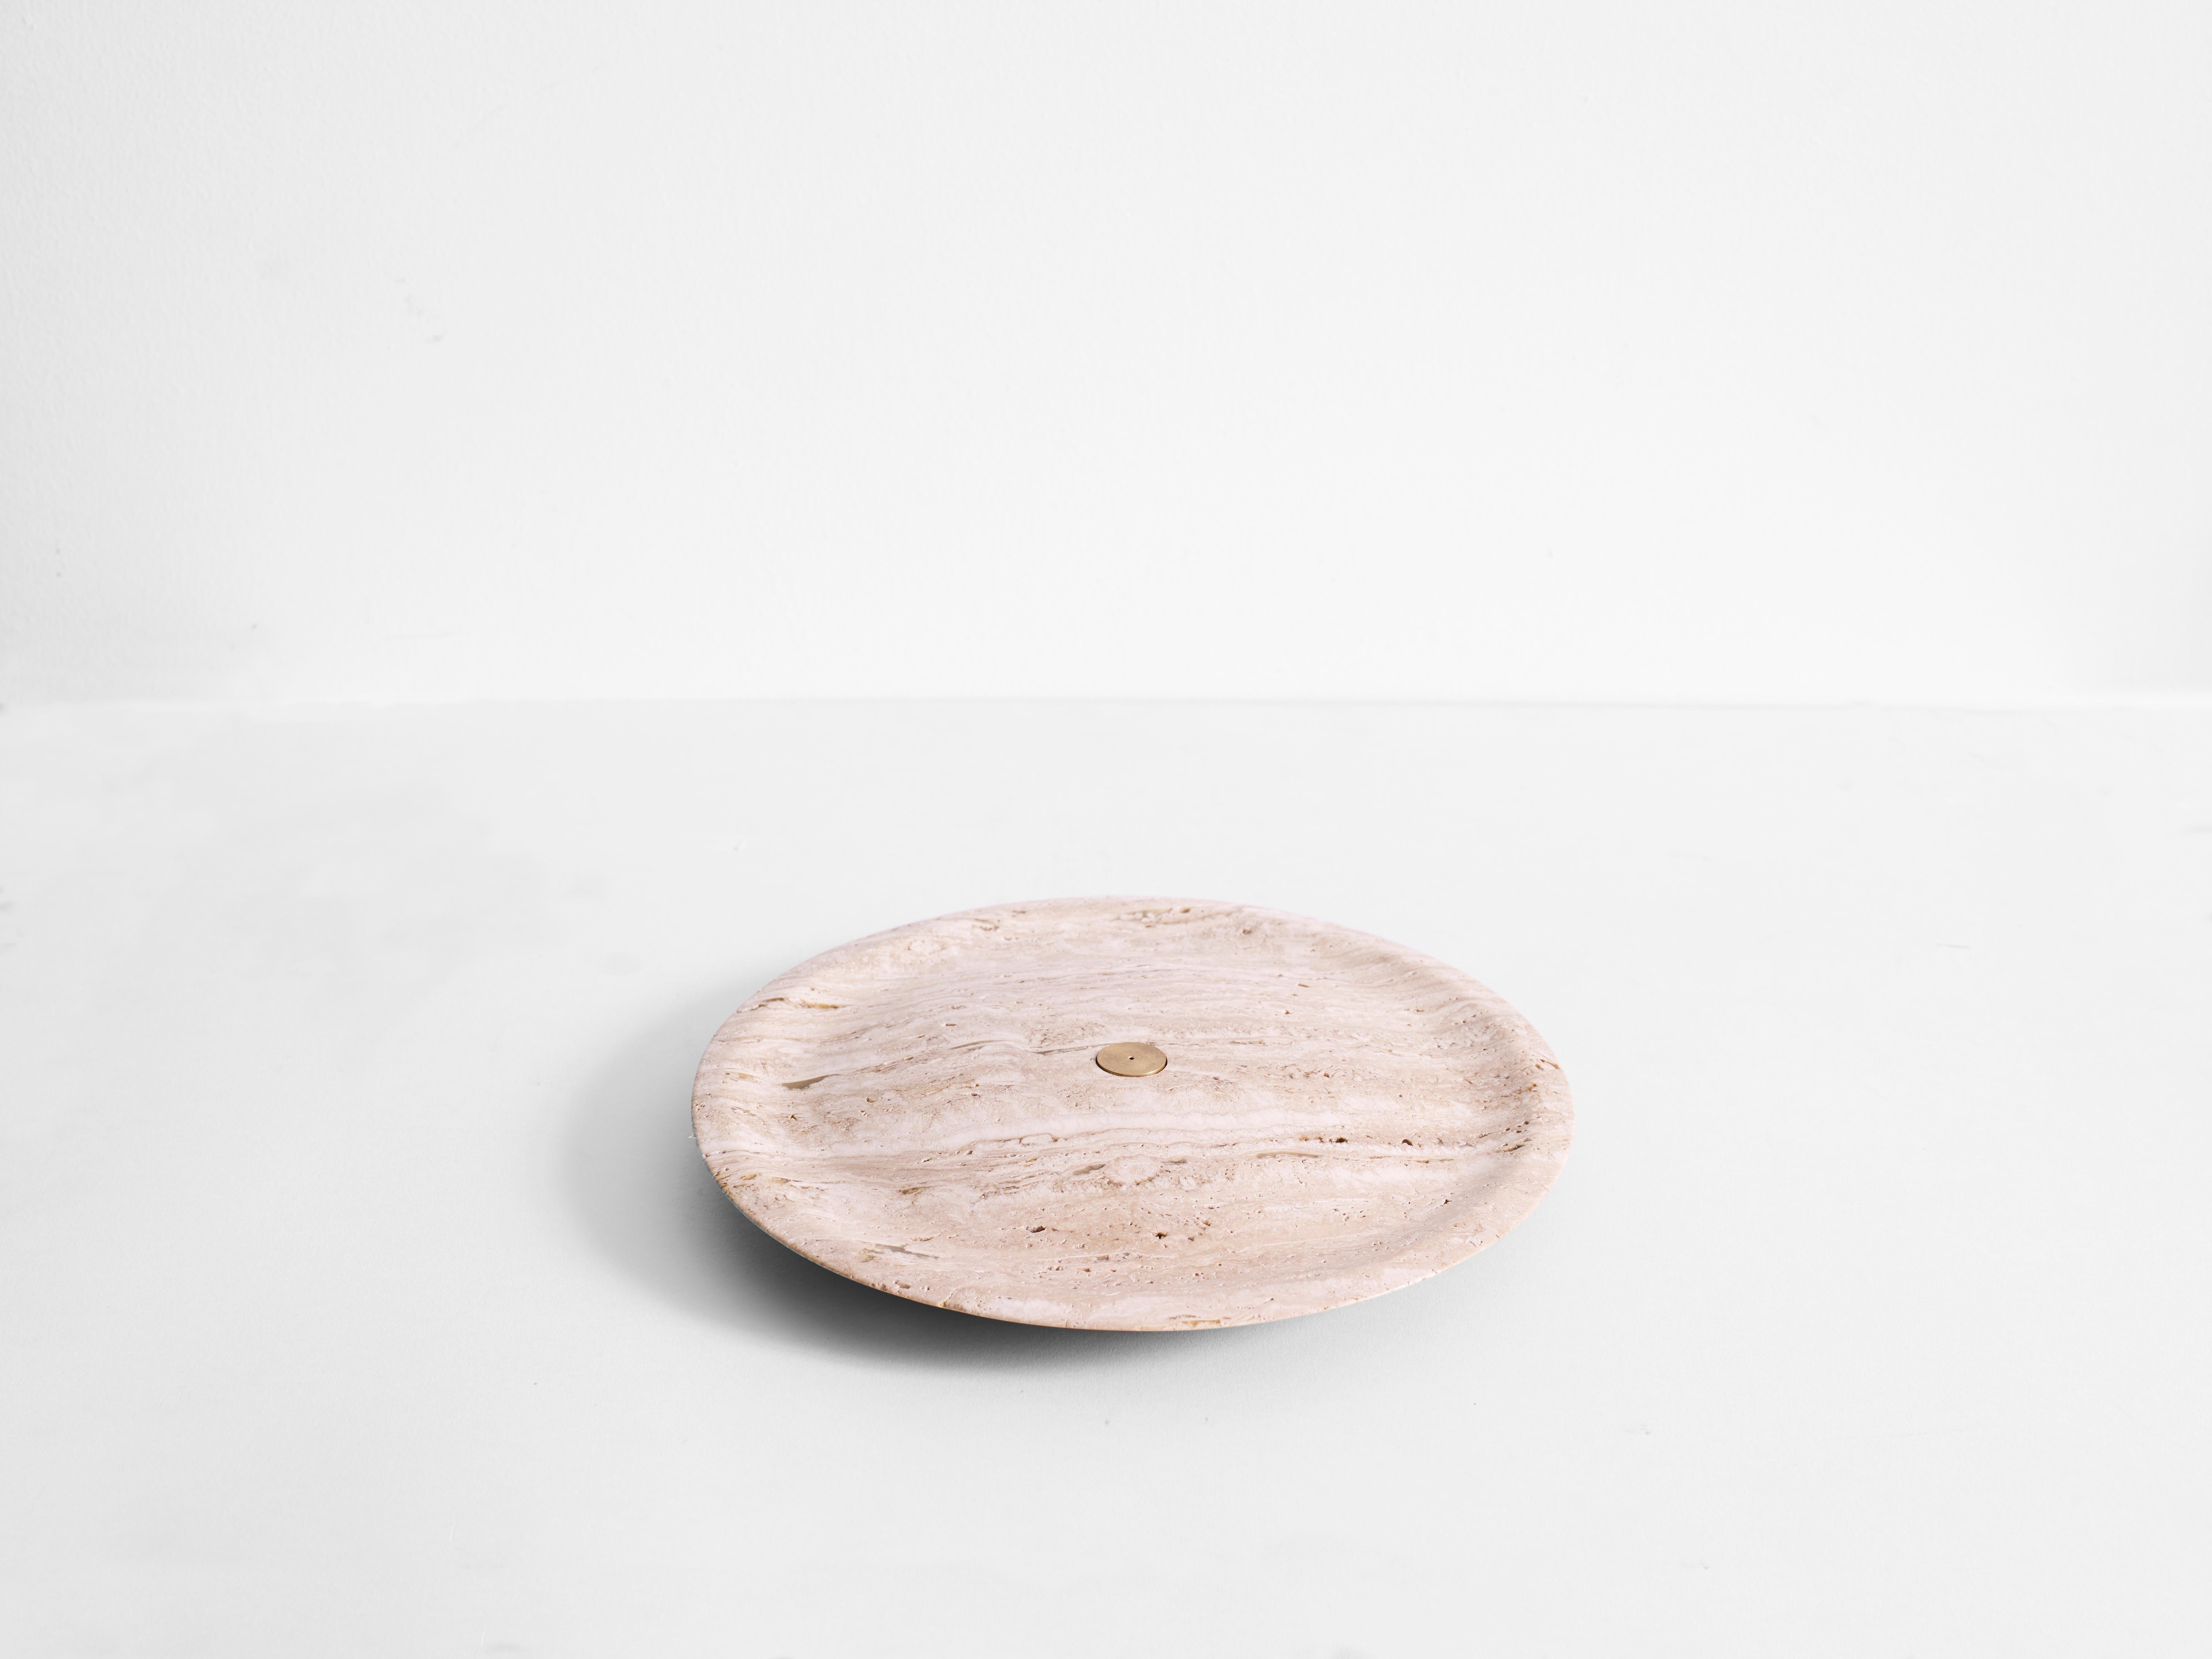 Incense plate, travertine sculpted marble by Henry Wilson

The incense plate is carved from solid green Guatemala marble and uses a central brass insert to hold incense sticks. The insert is double sided, one side for thin incense sticks, and one